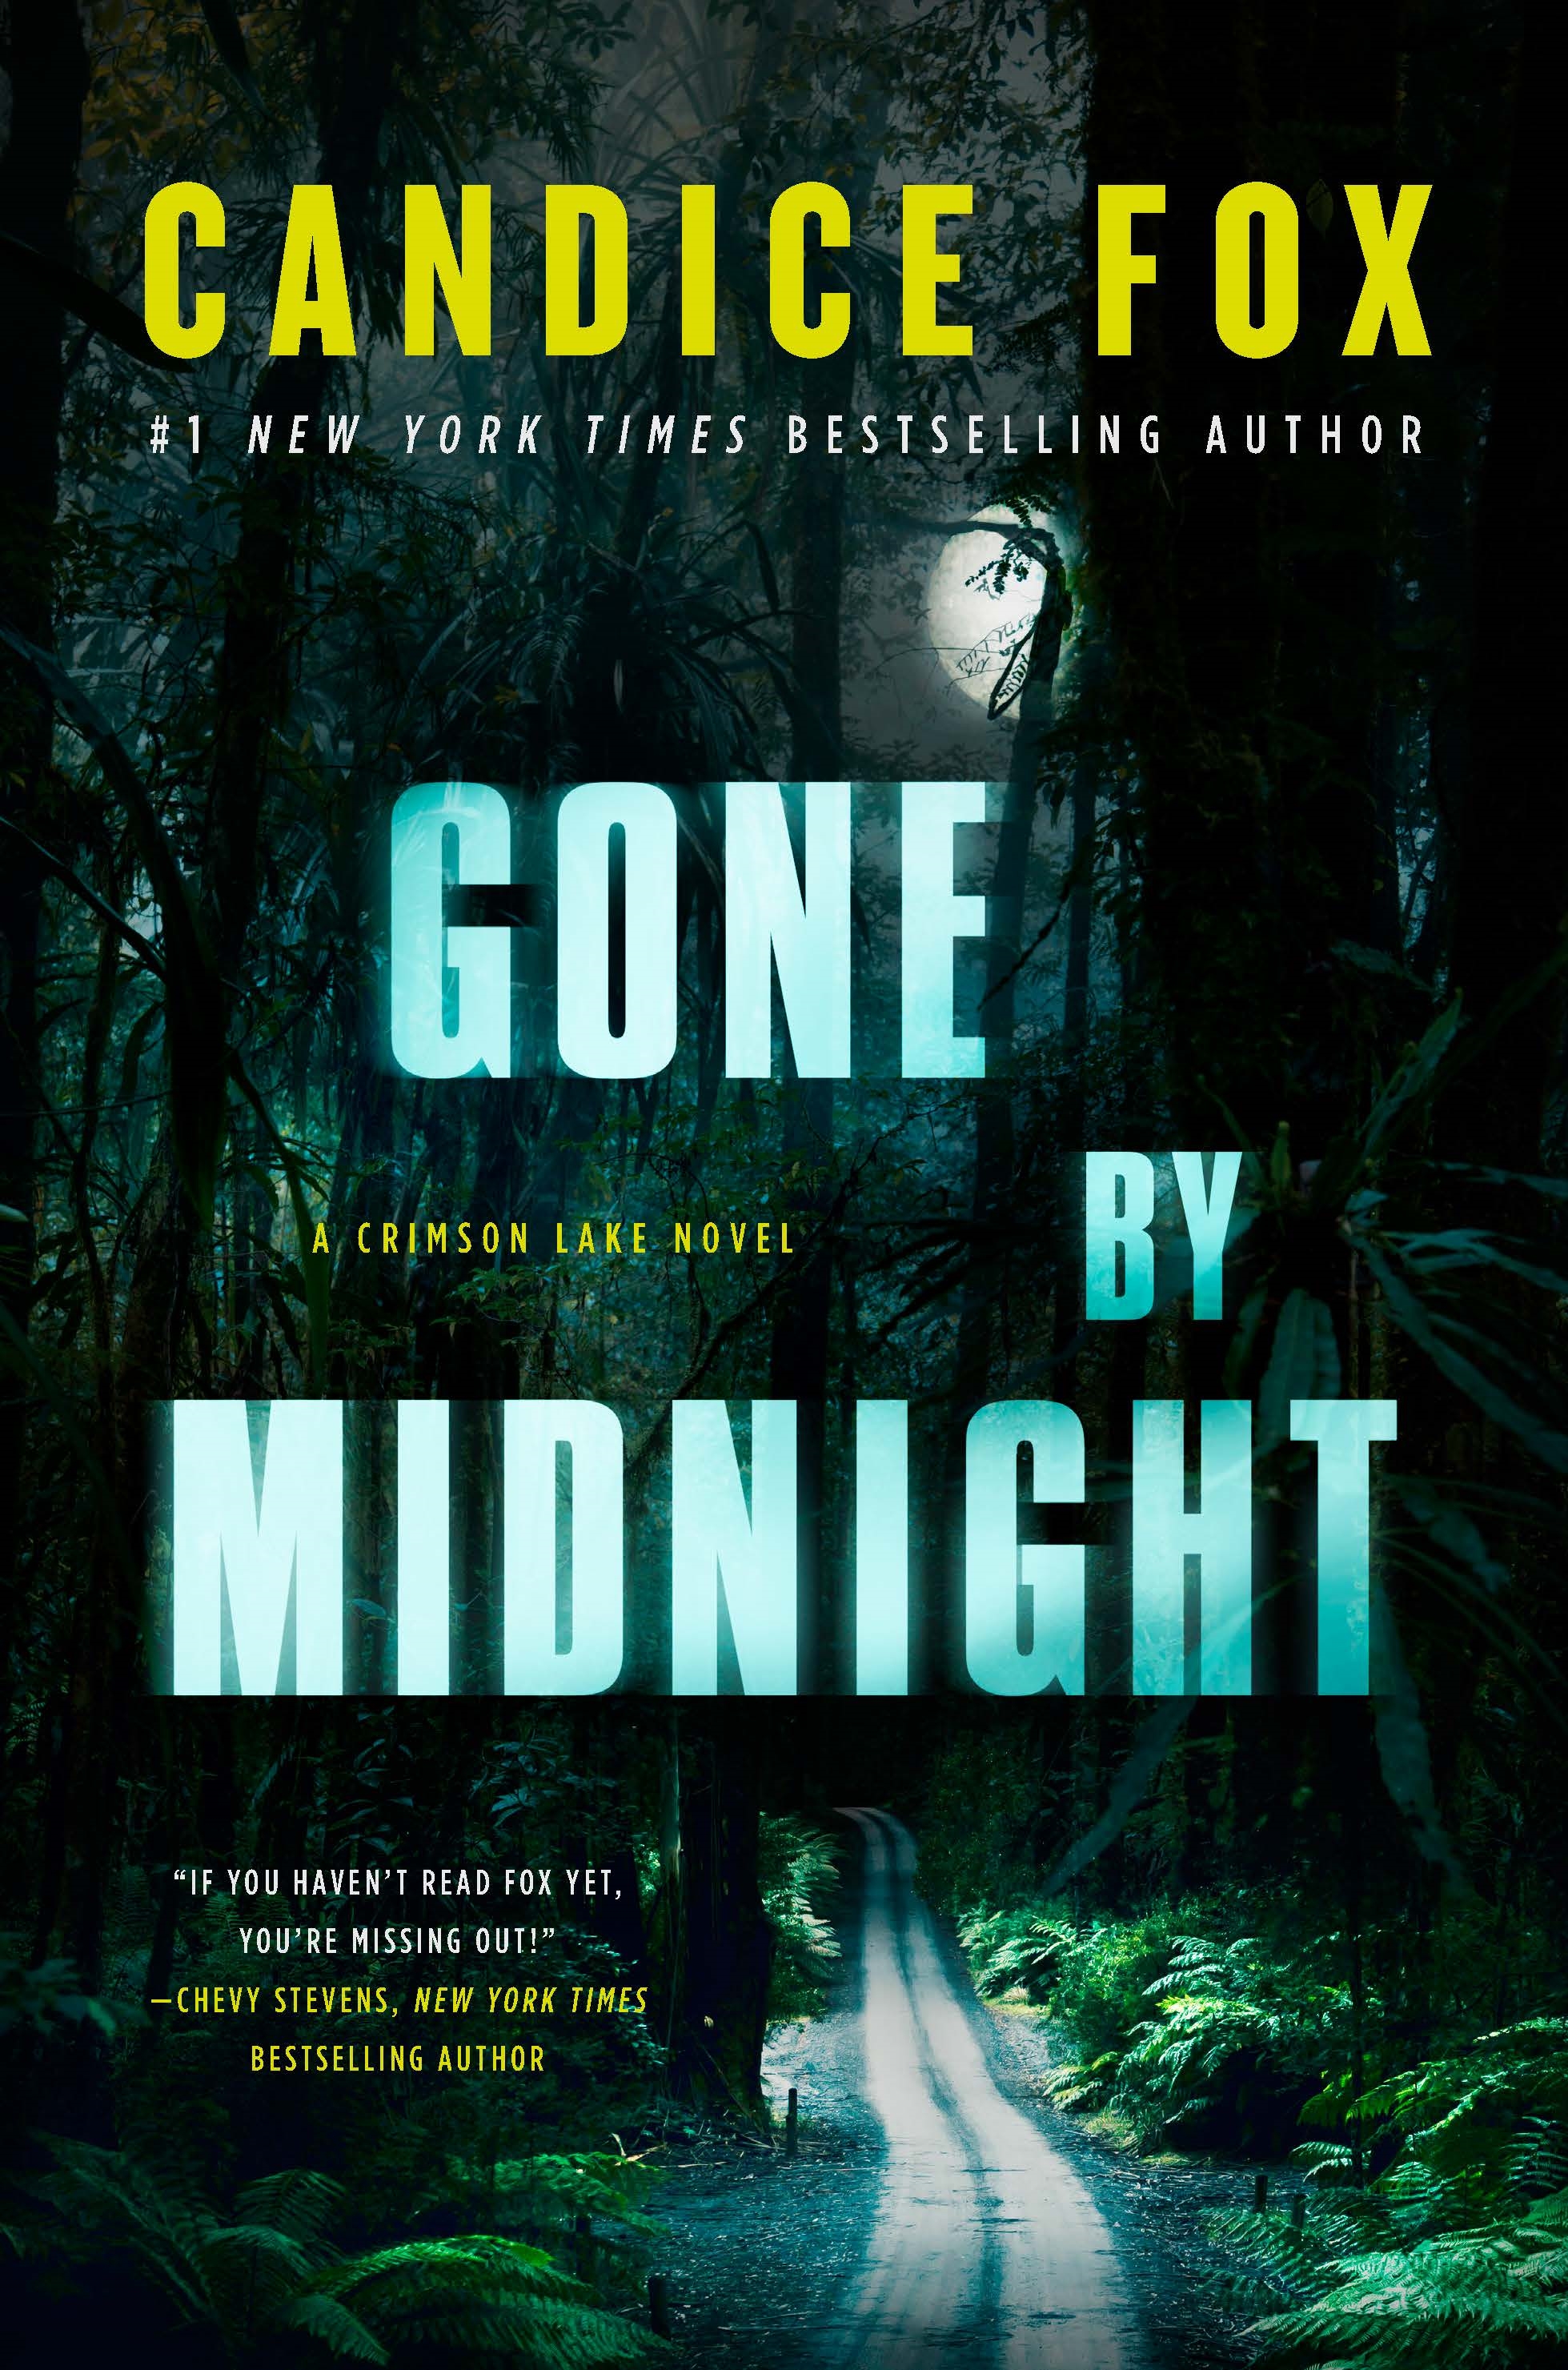 Book “Gone by Midnight” by Candice Fox — March 10, 2020